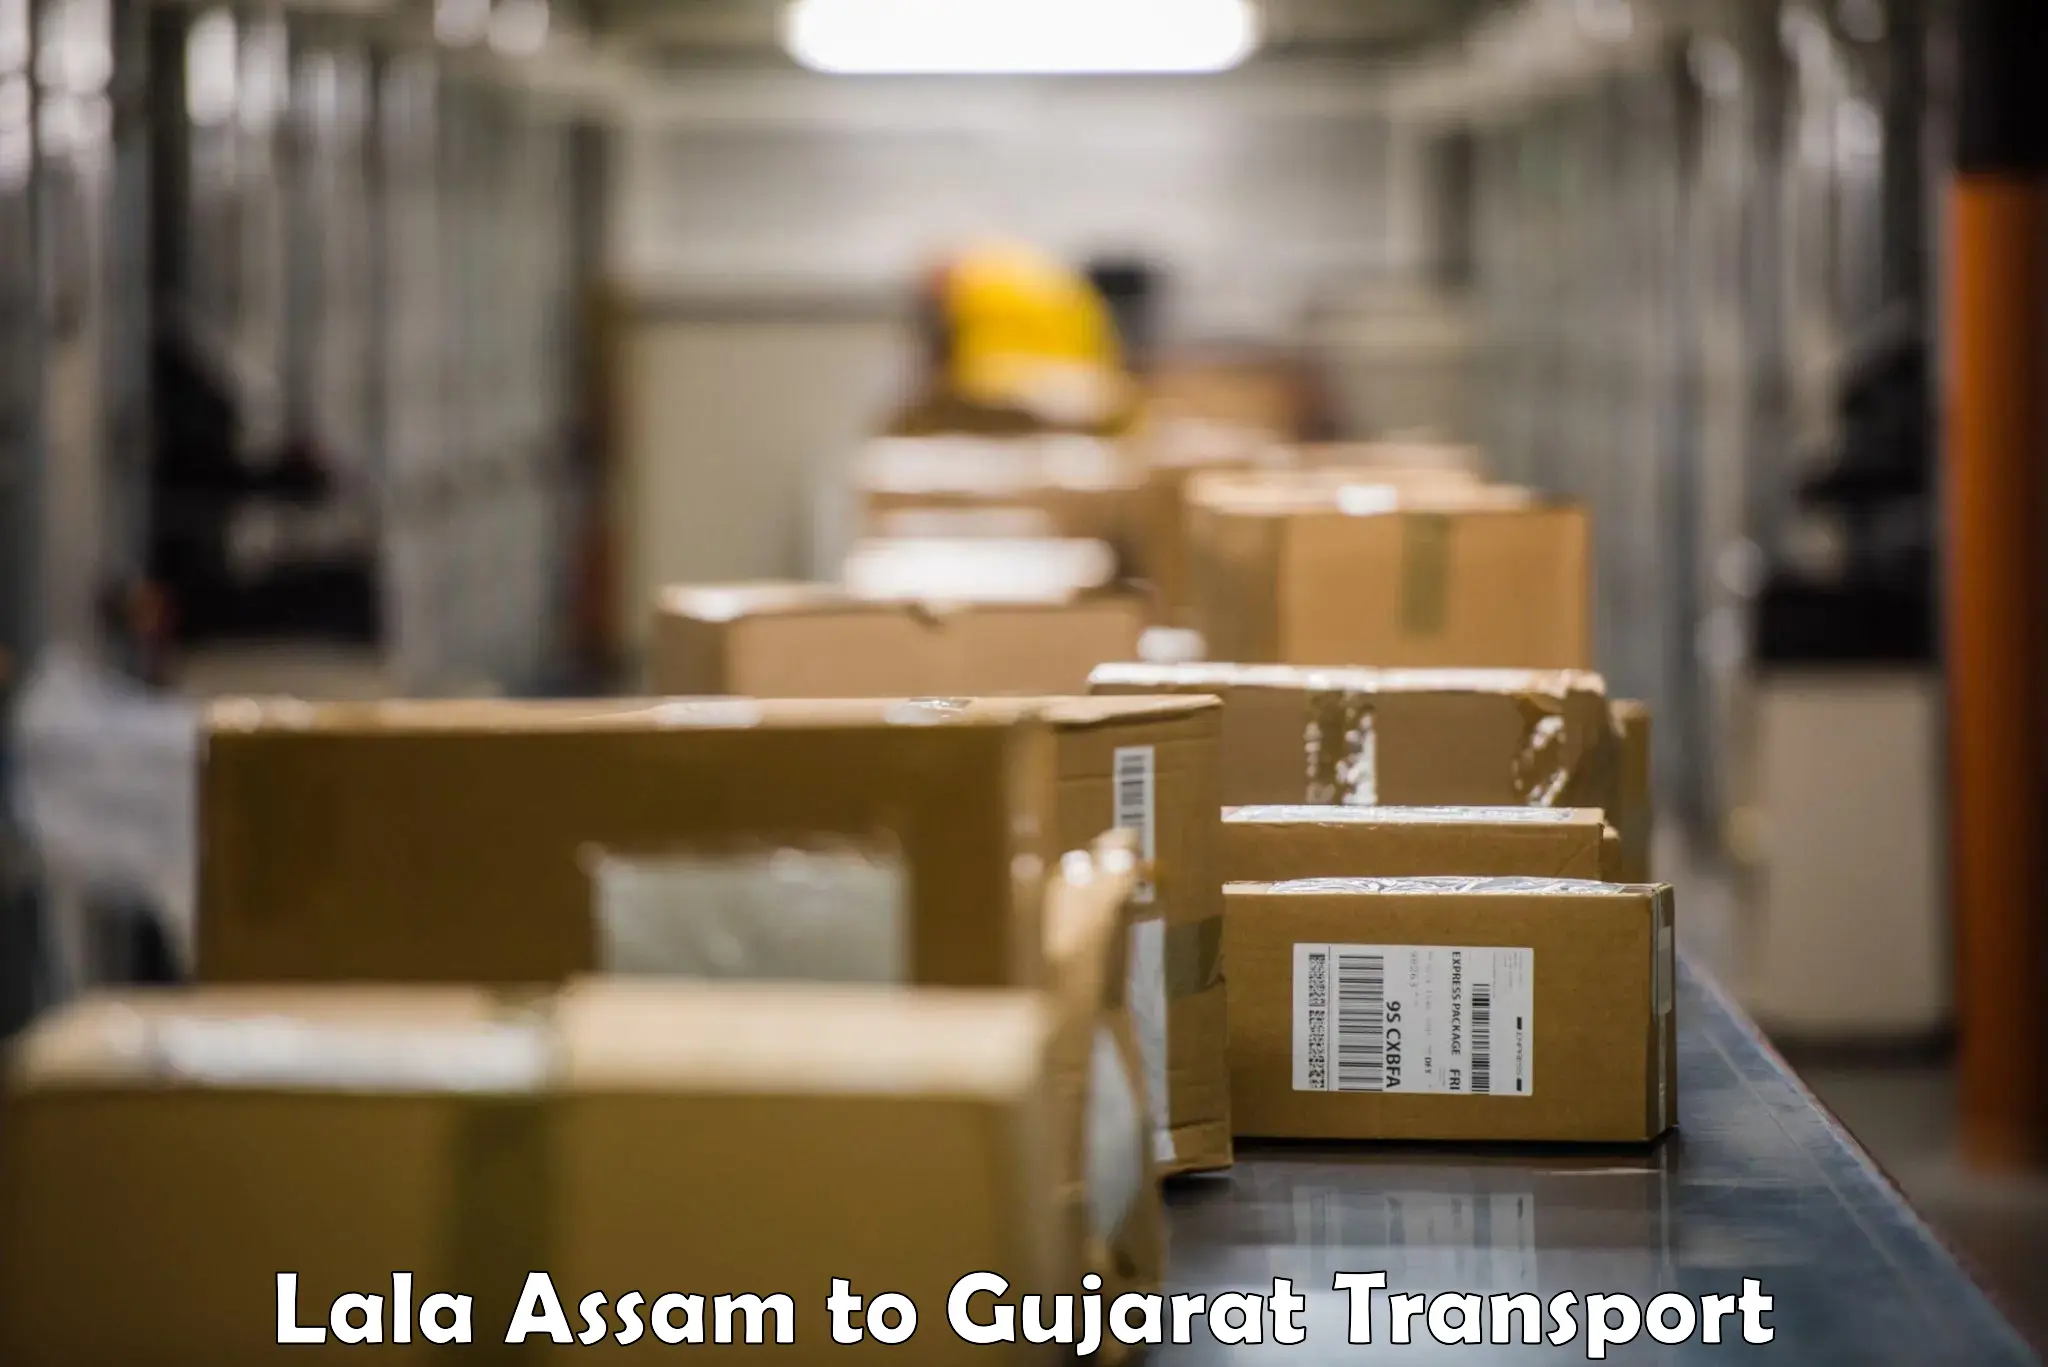 Cargo train transport services in Lala Assam to Jetpur